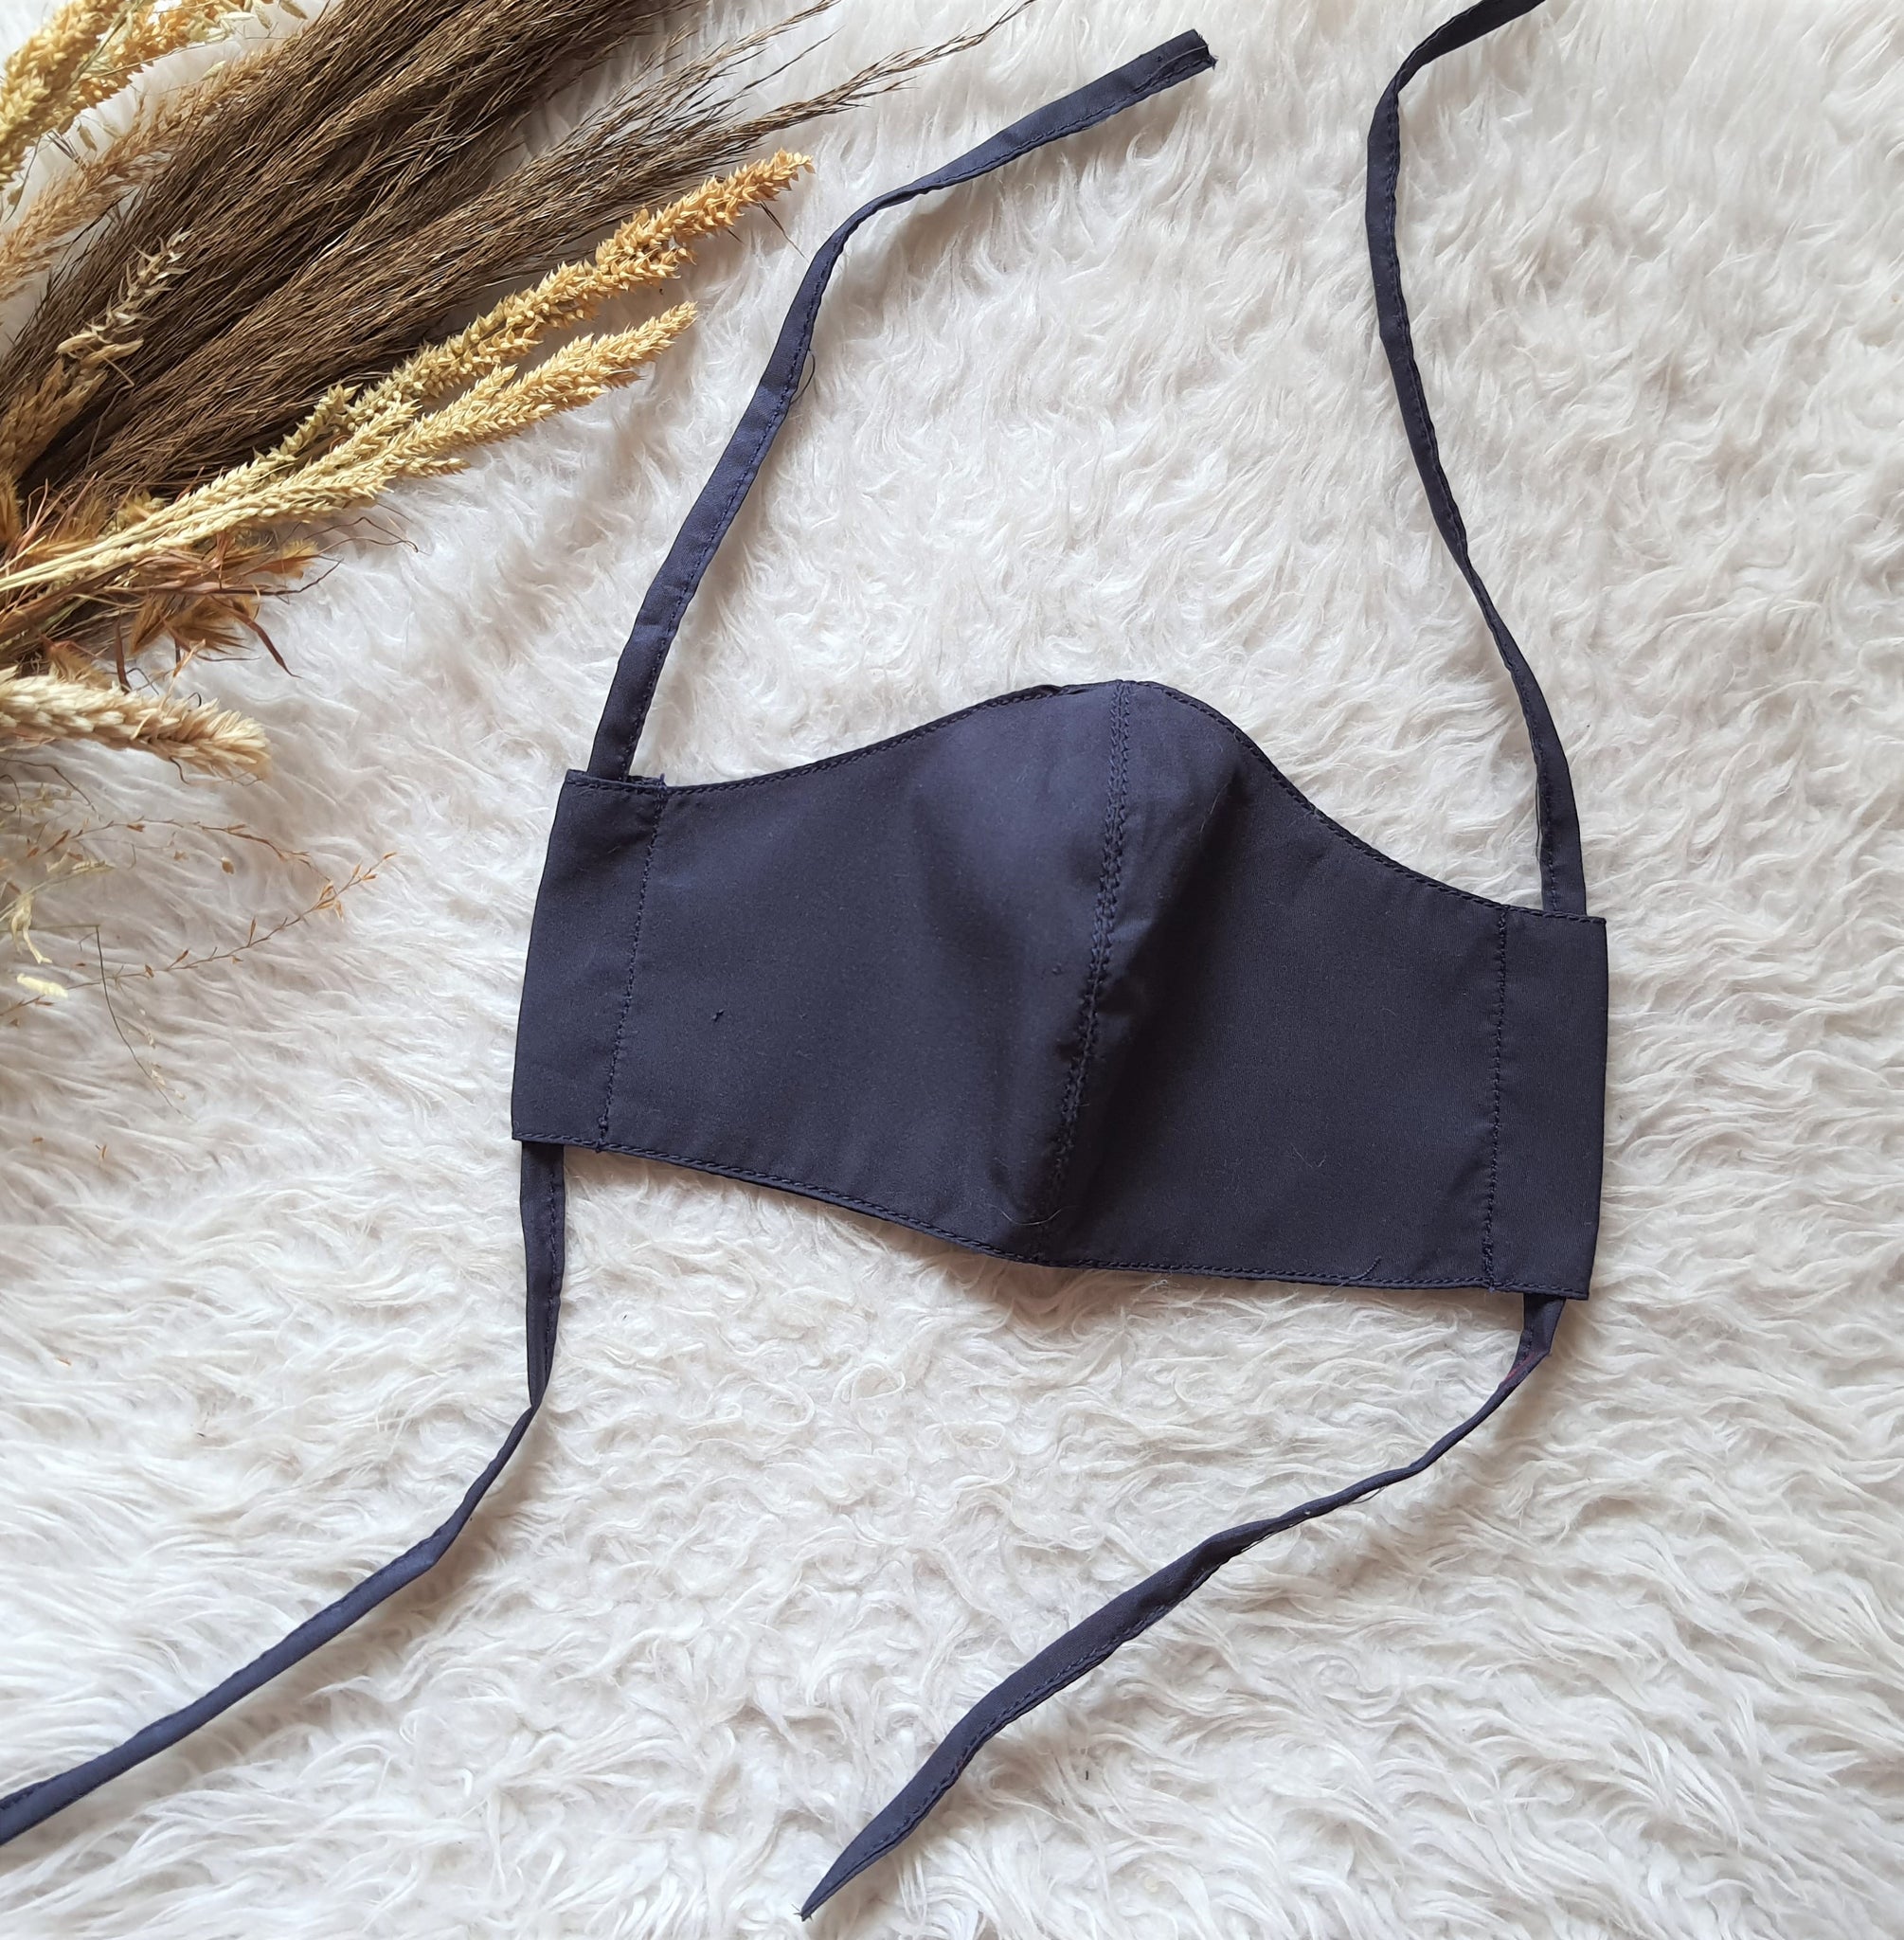 RAZA Microfiber Mask with adjustable ties (with filter pocket)